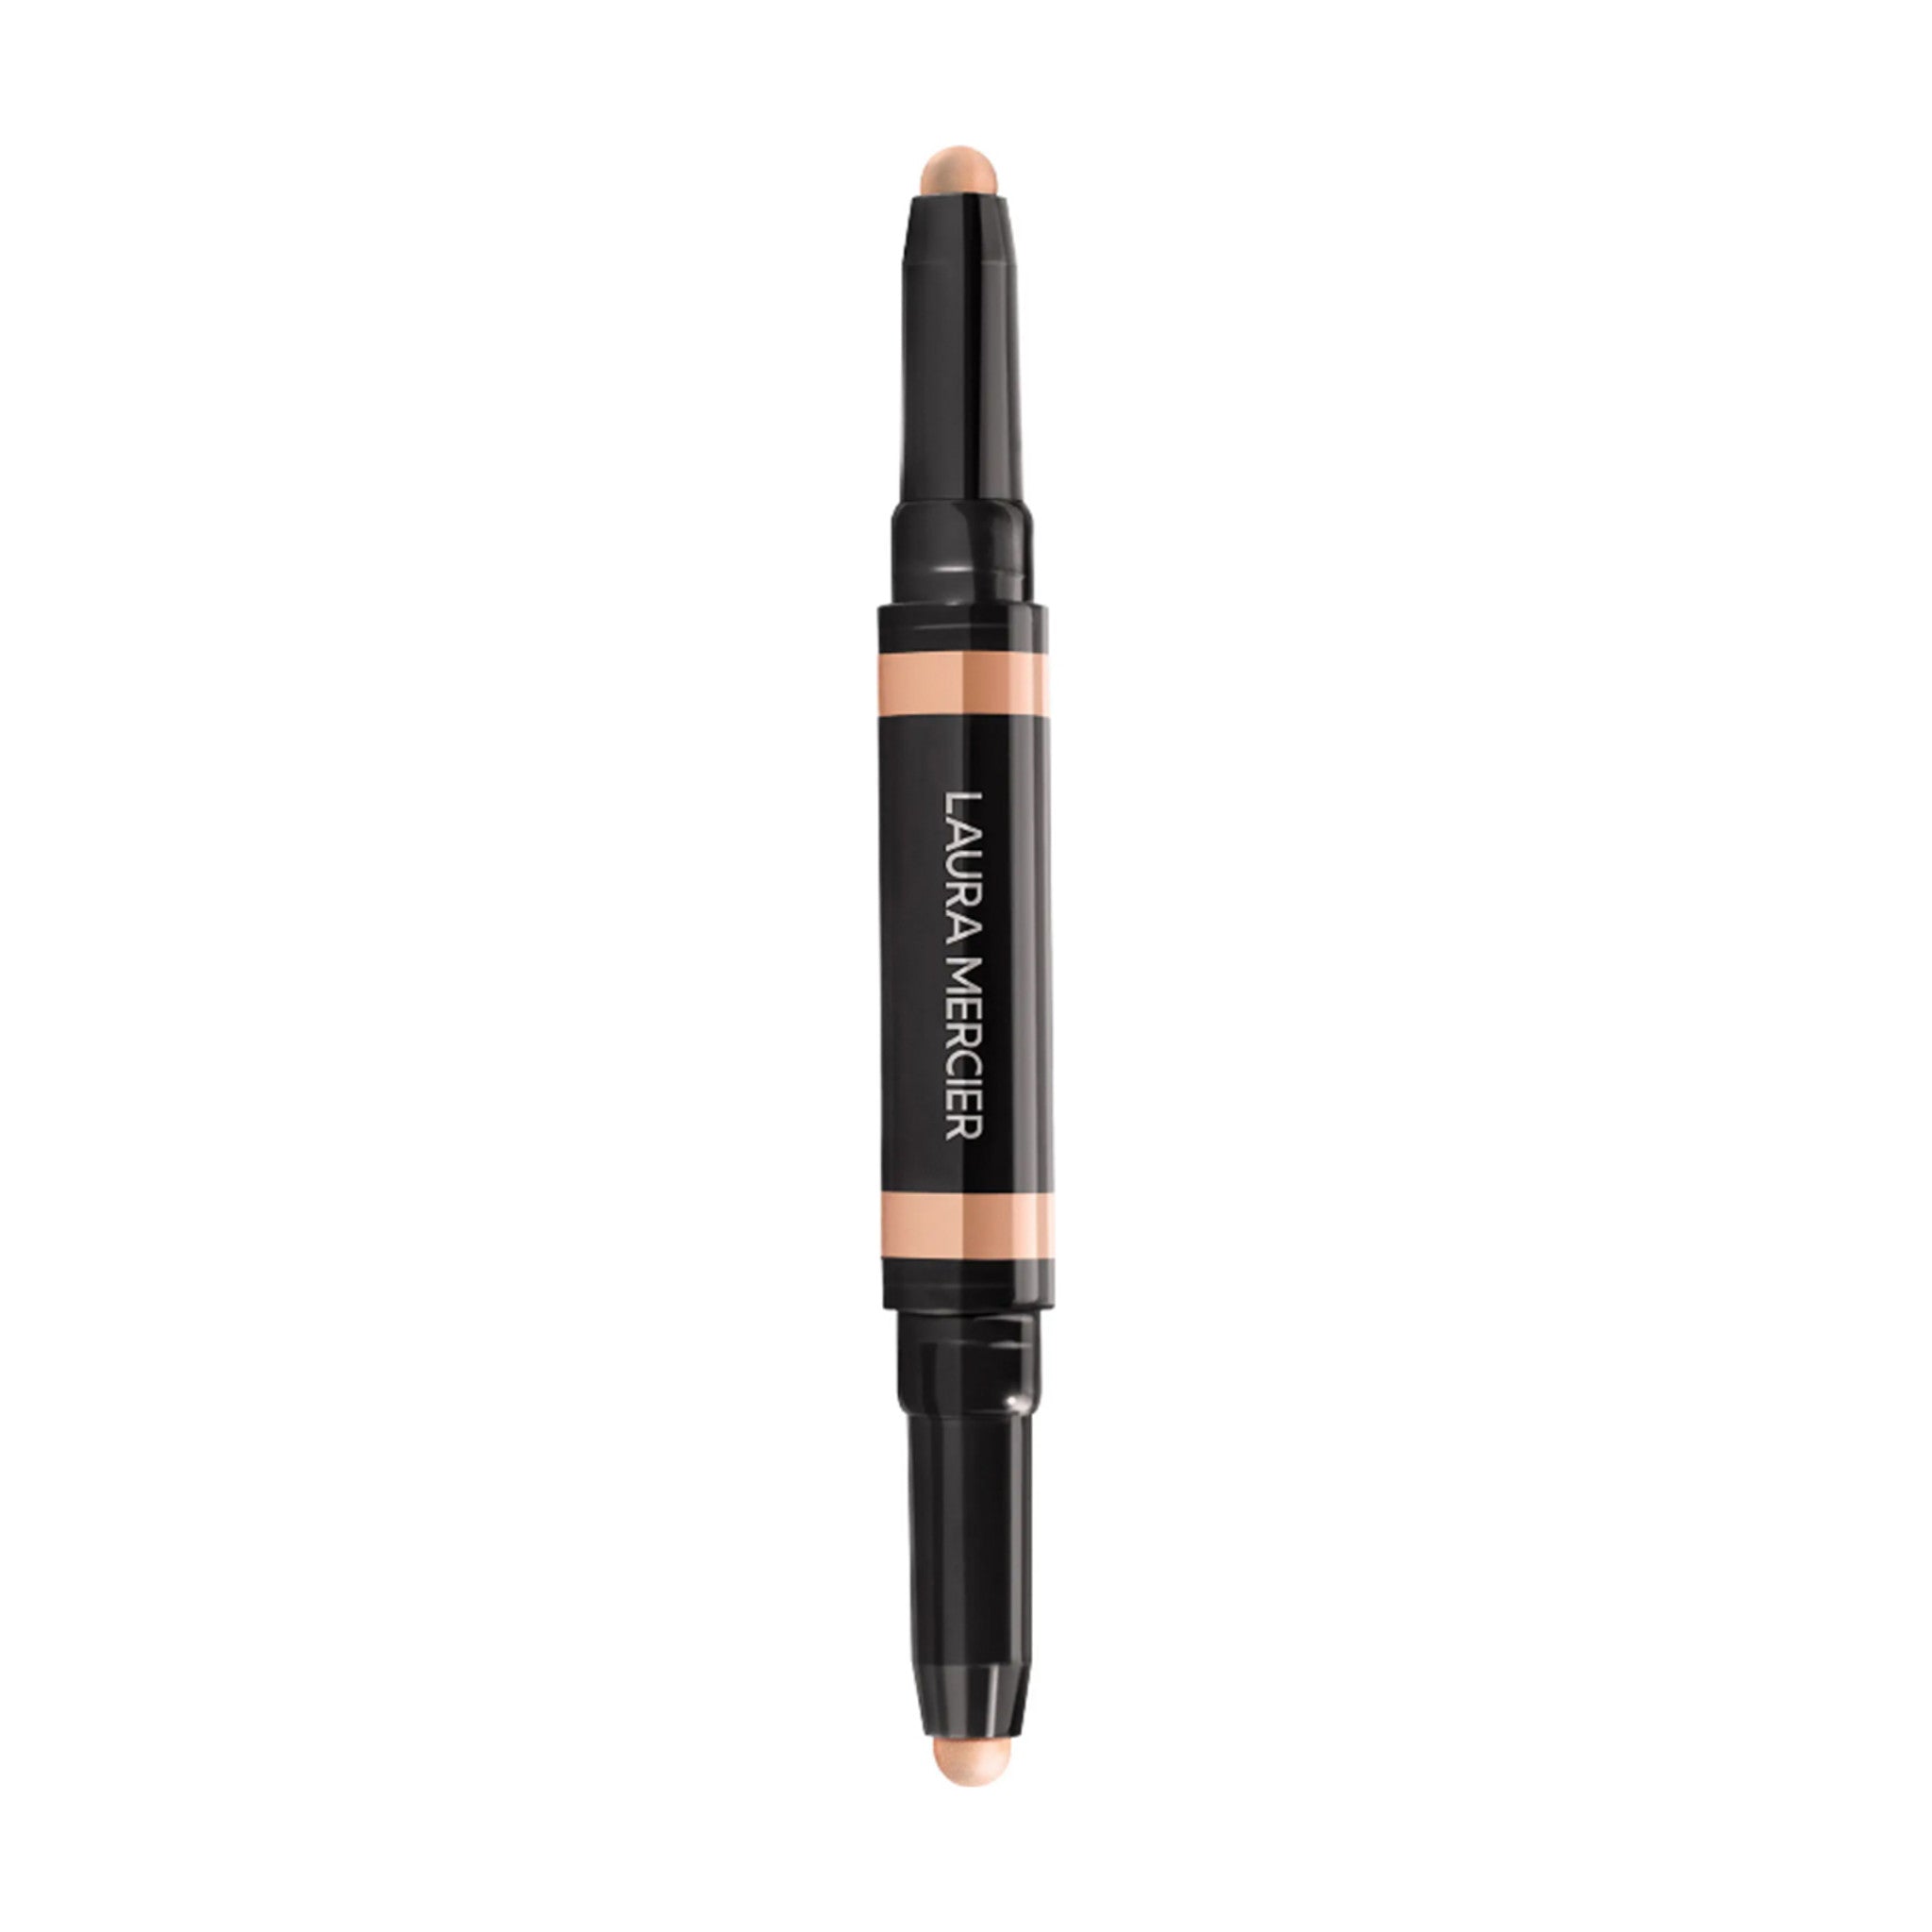 Laura Mercier Secret Camouflage Concealer Duo Stick Color/Shade variant: 1C main image. This product is for light cool complexions